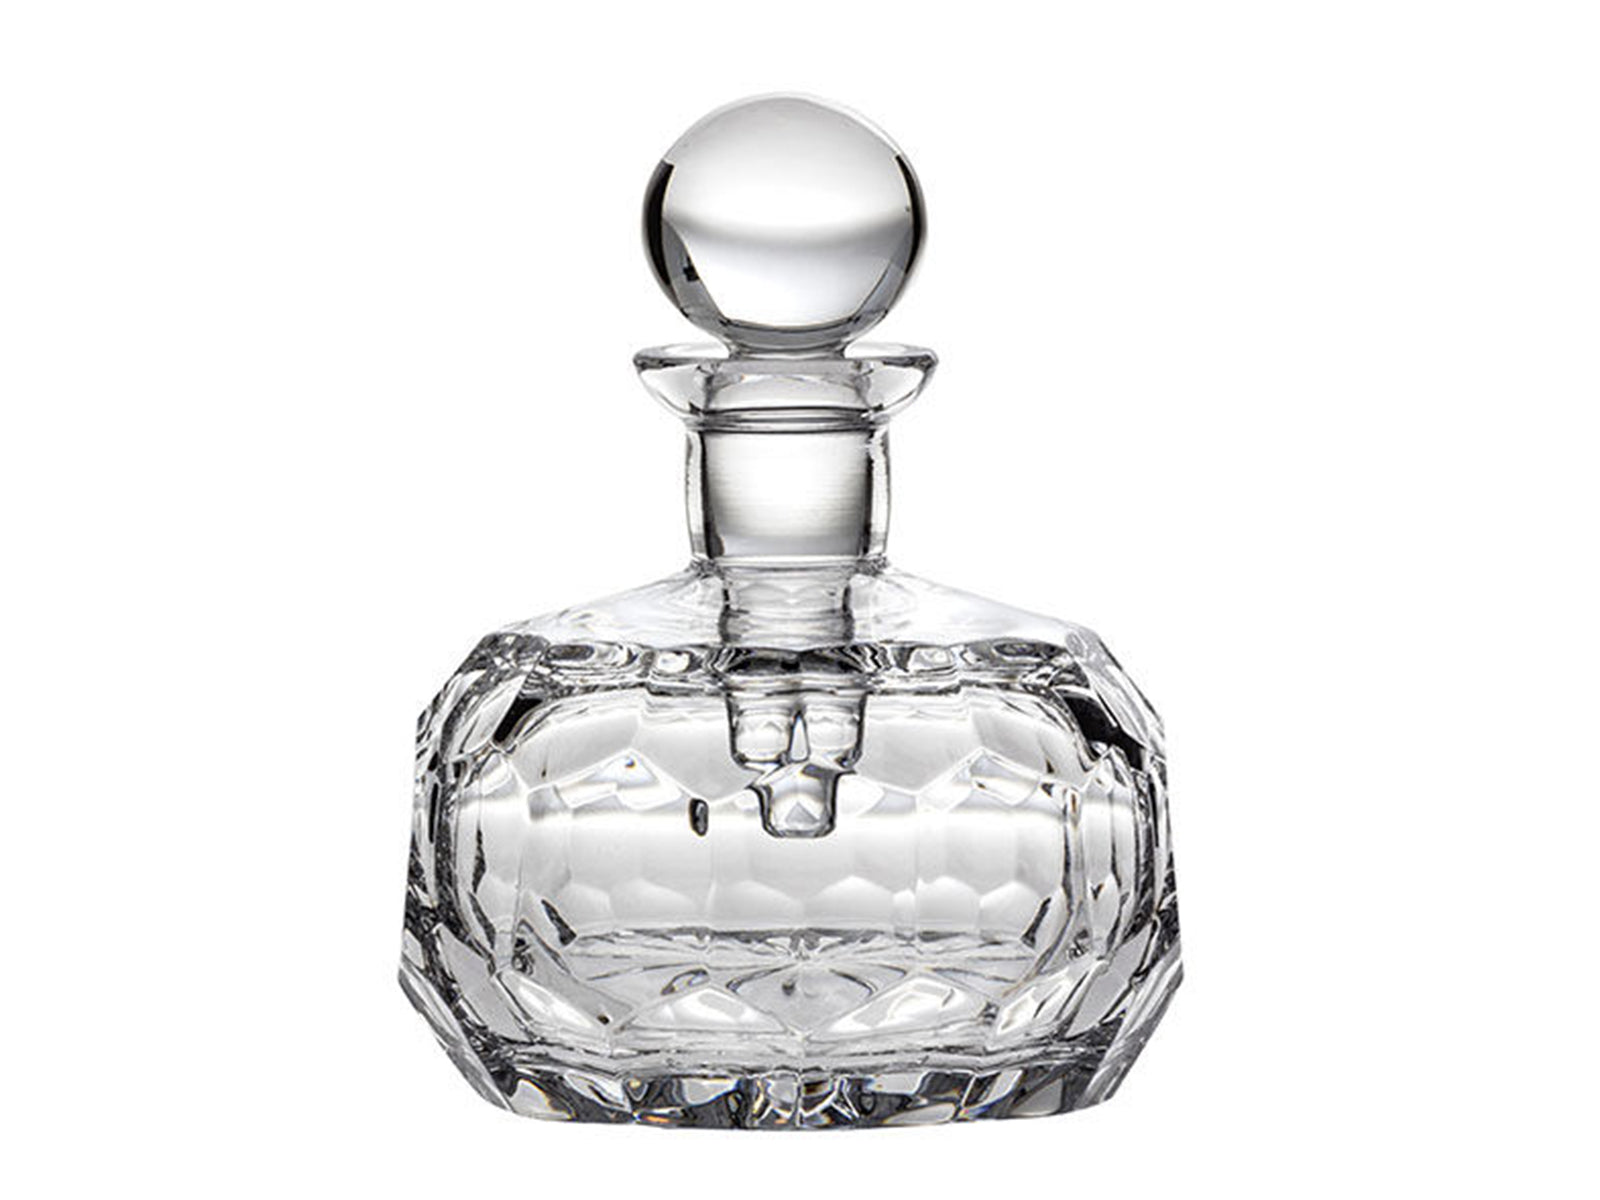 A round crystal perfume bottle with an art-deco style design cut into the exterior. It has a spherical stopper with a slender dabber inside.